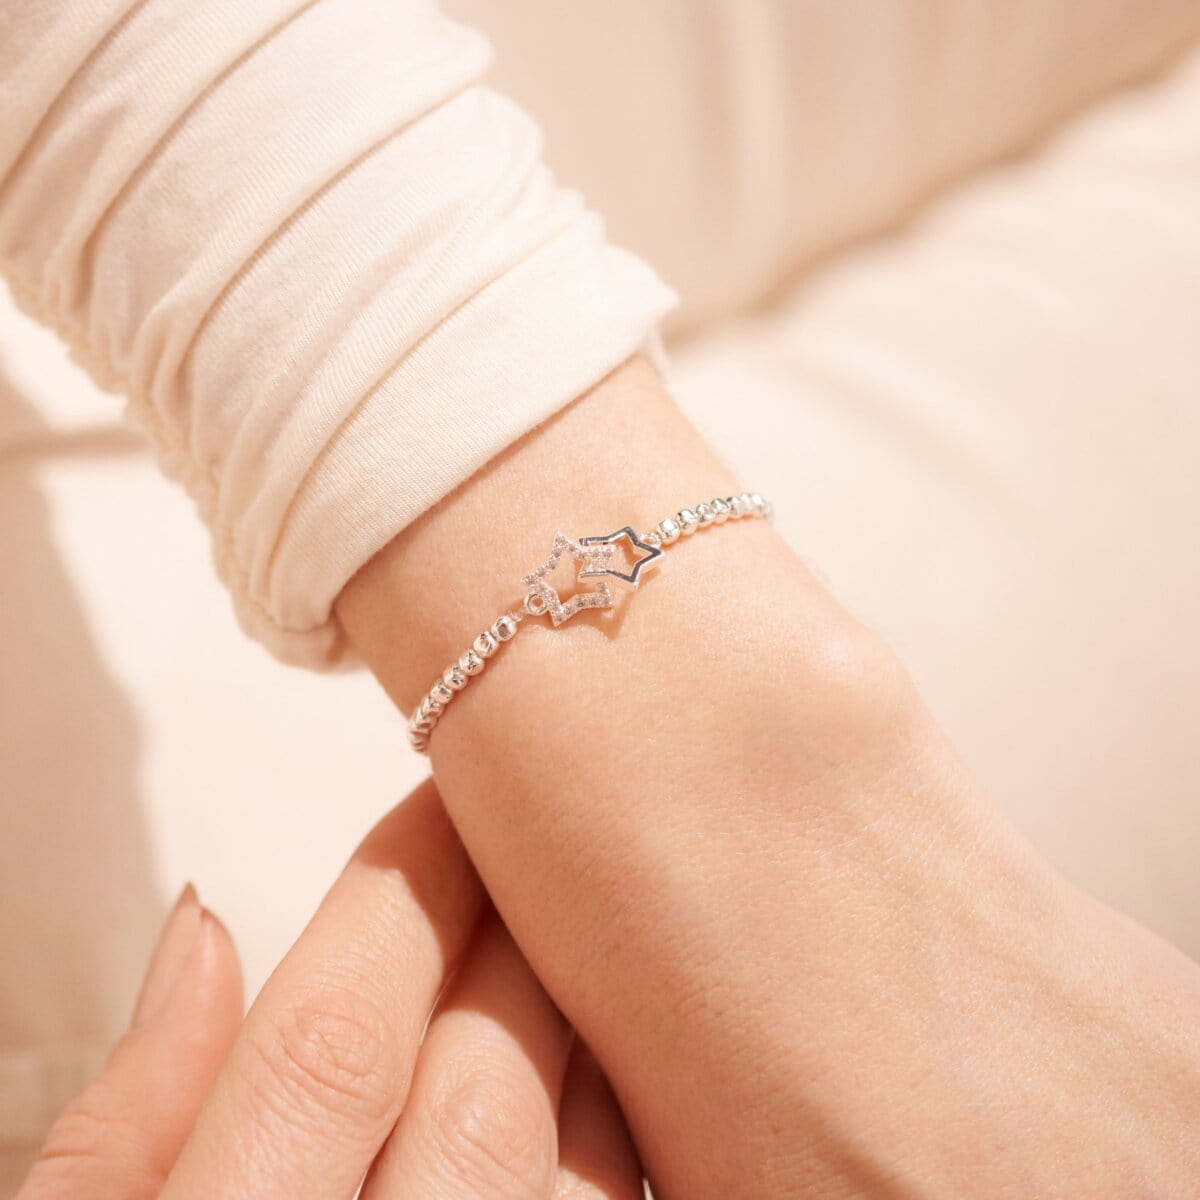 Joma Jewellery Bracelets Joma Jewellery Forever Yours Bracelet - You Are One In A Million